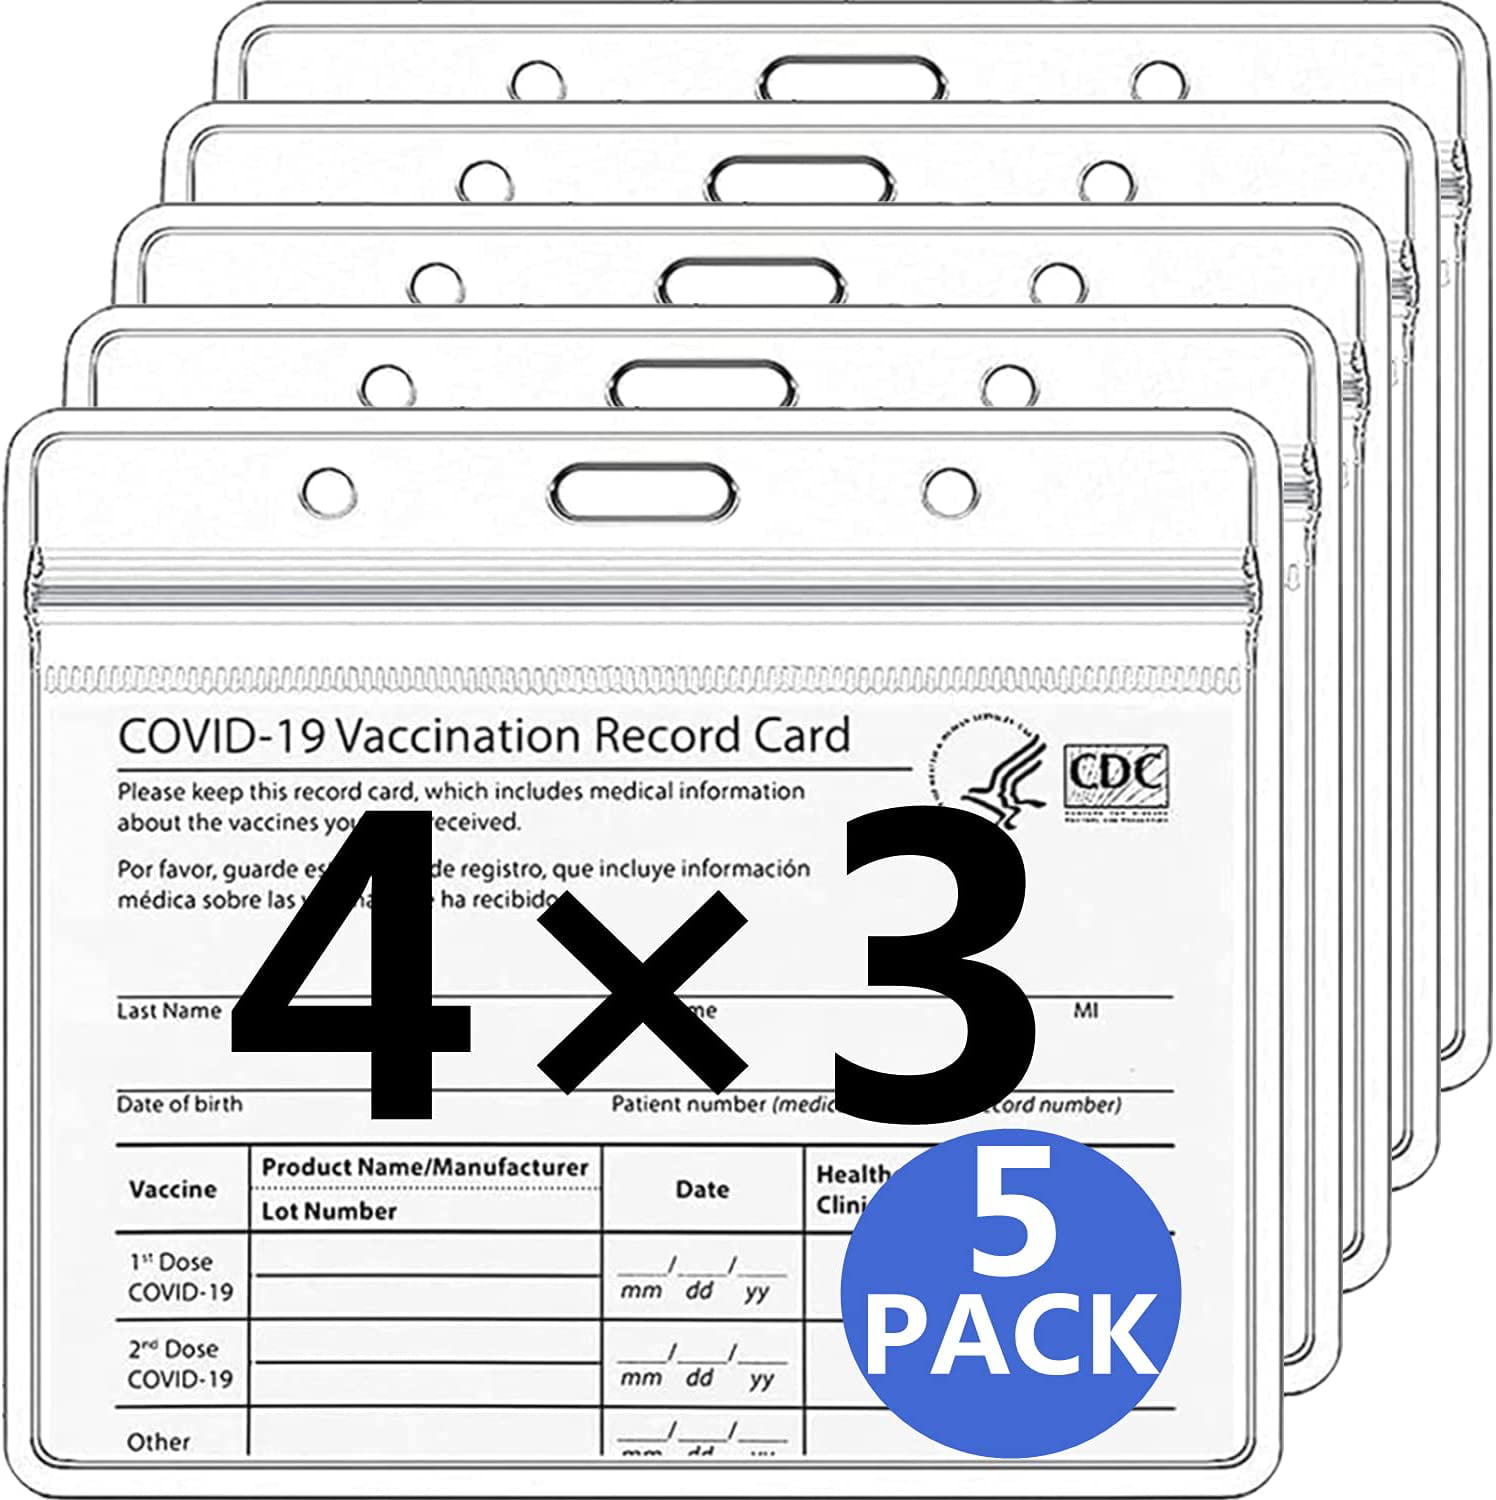 CDC Vaccine Card Holder 4 X 3 Horizontal Immunization Record ID Card Name Tag Badge Card Vaccine Card Case Clear Sleeve Vaccination Card Protector Waterproof Type Resealable Zip 10 Pack